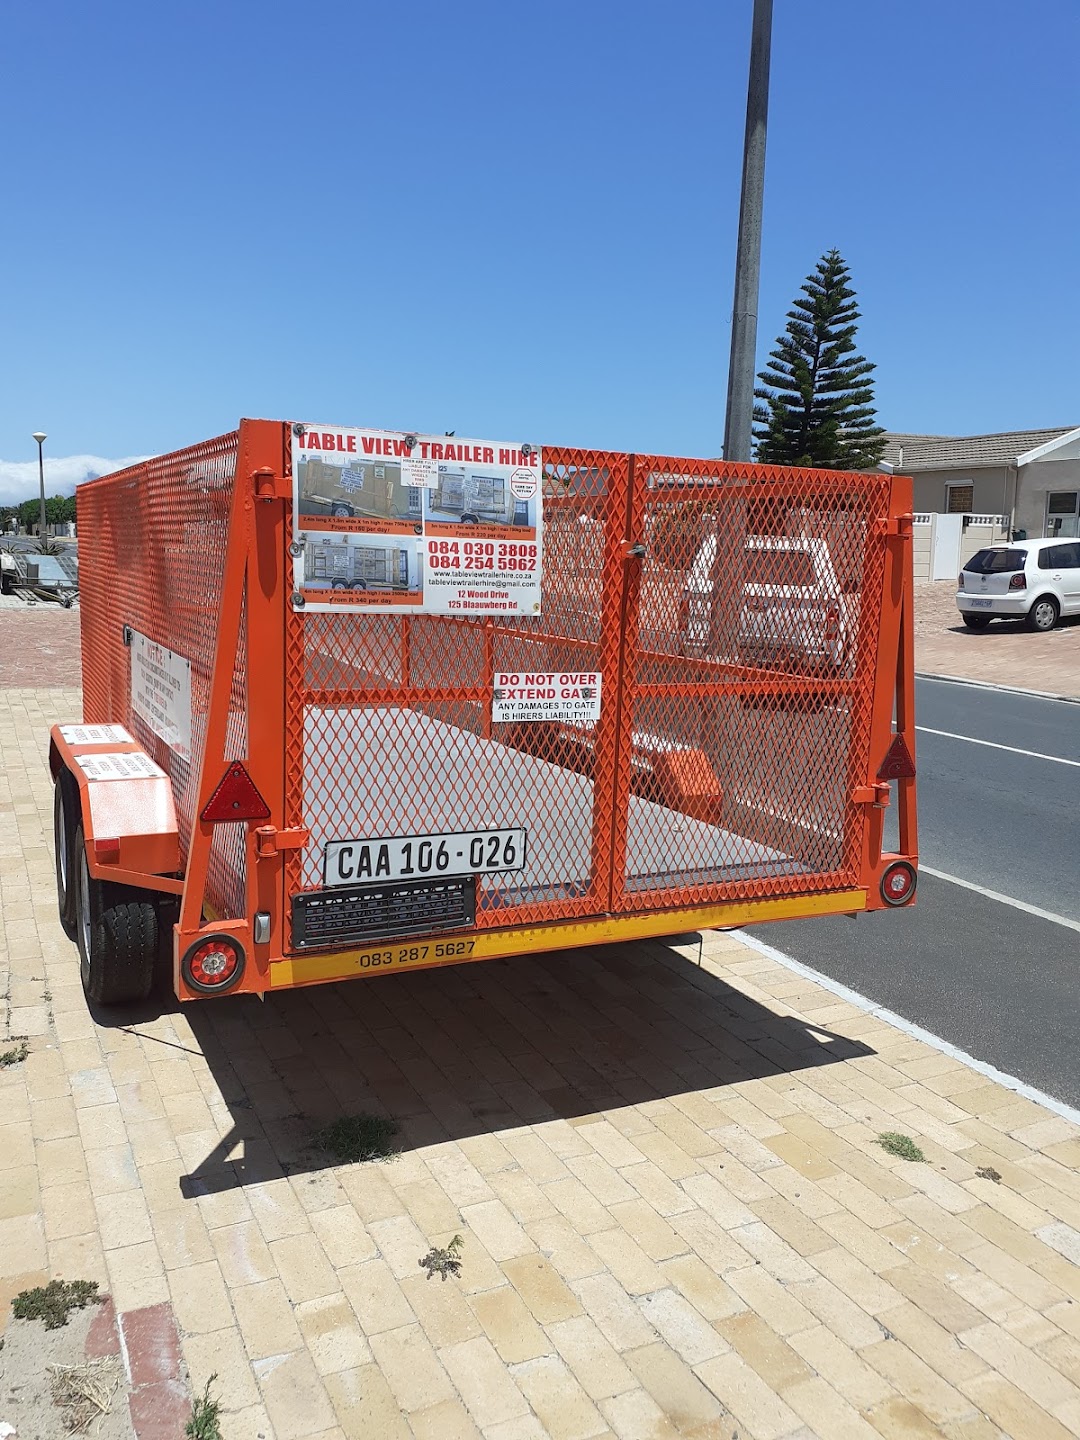 Table View Trailer Hire